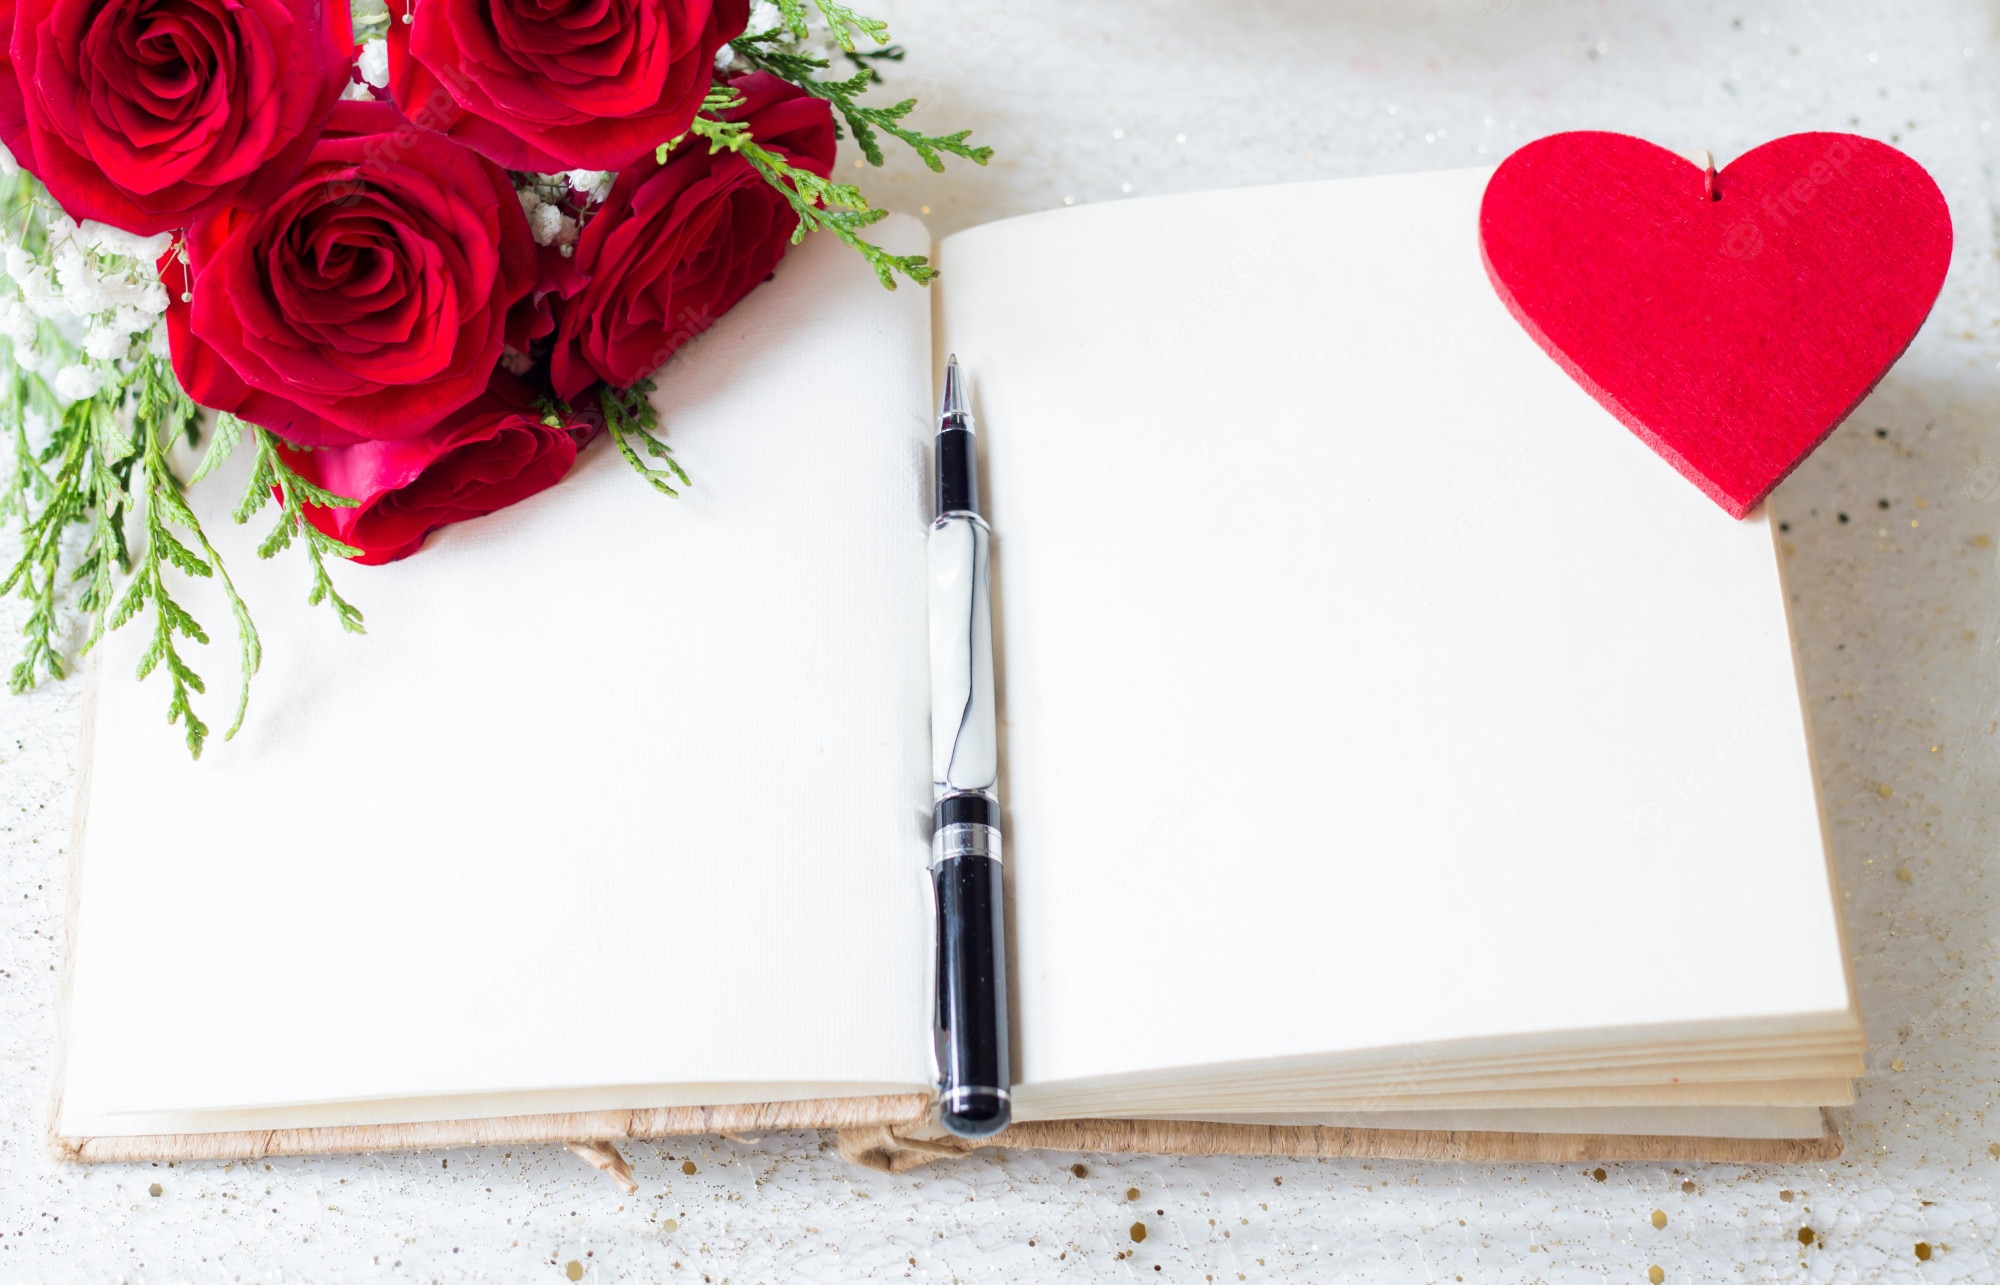 Premium Photo. Open book with blank pages and pen over and red roses and felt heart background